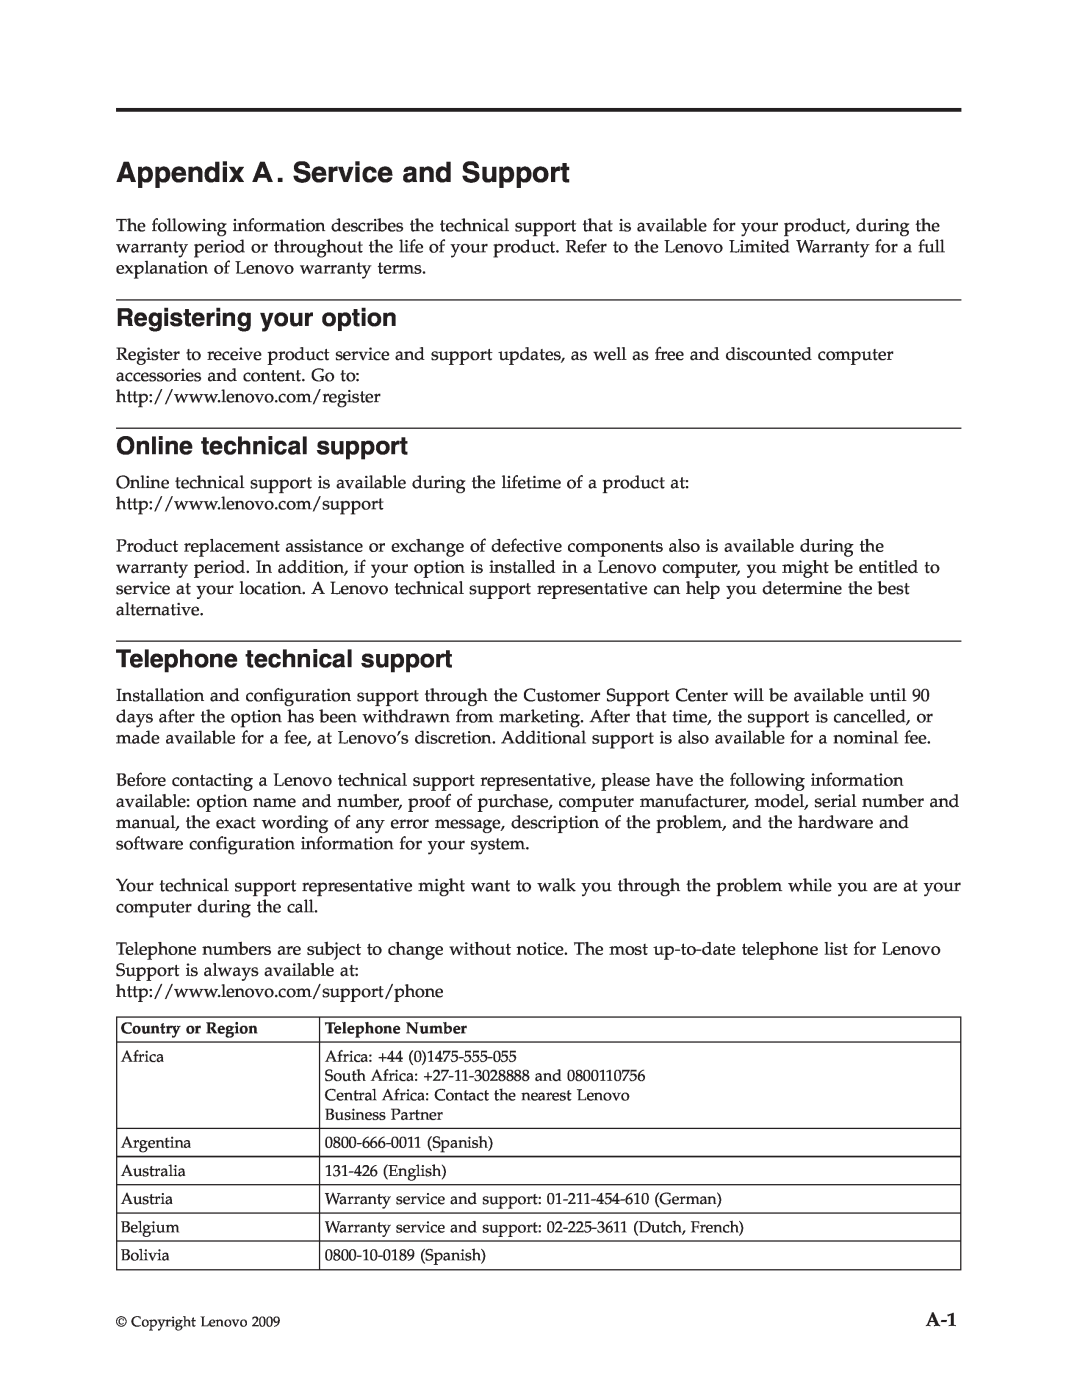 Lenovo D186 manual Appendix A. Service and Support, Registering your option, Online technical support, A-13 